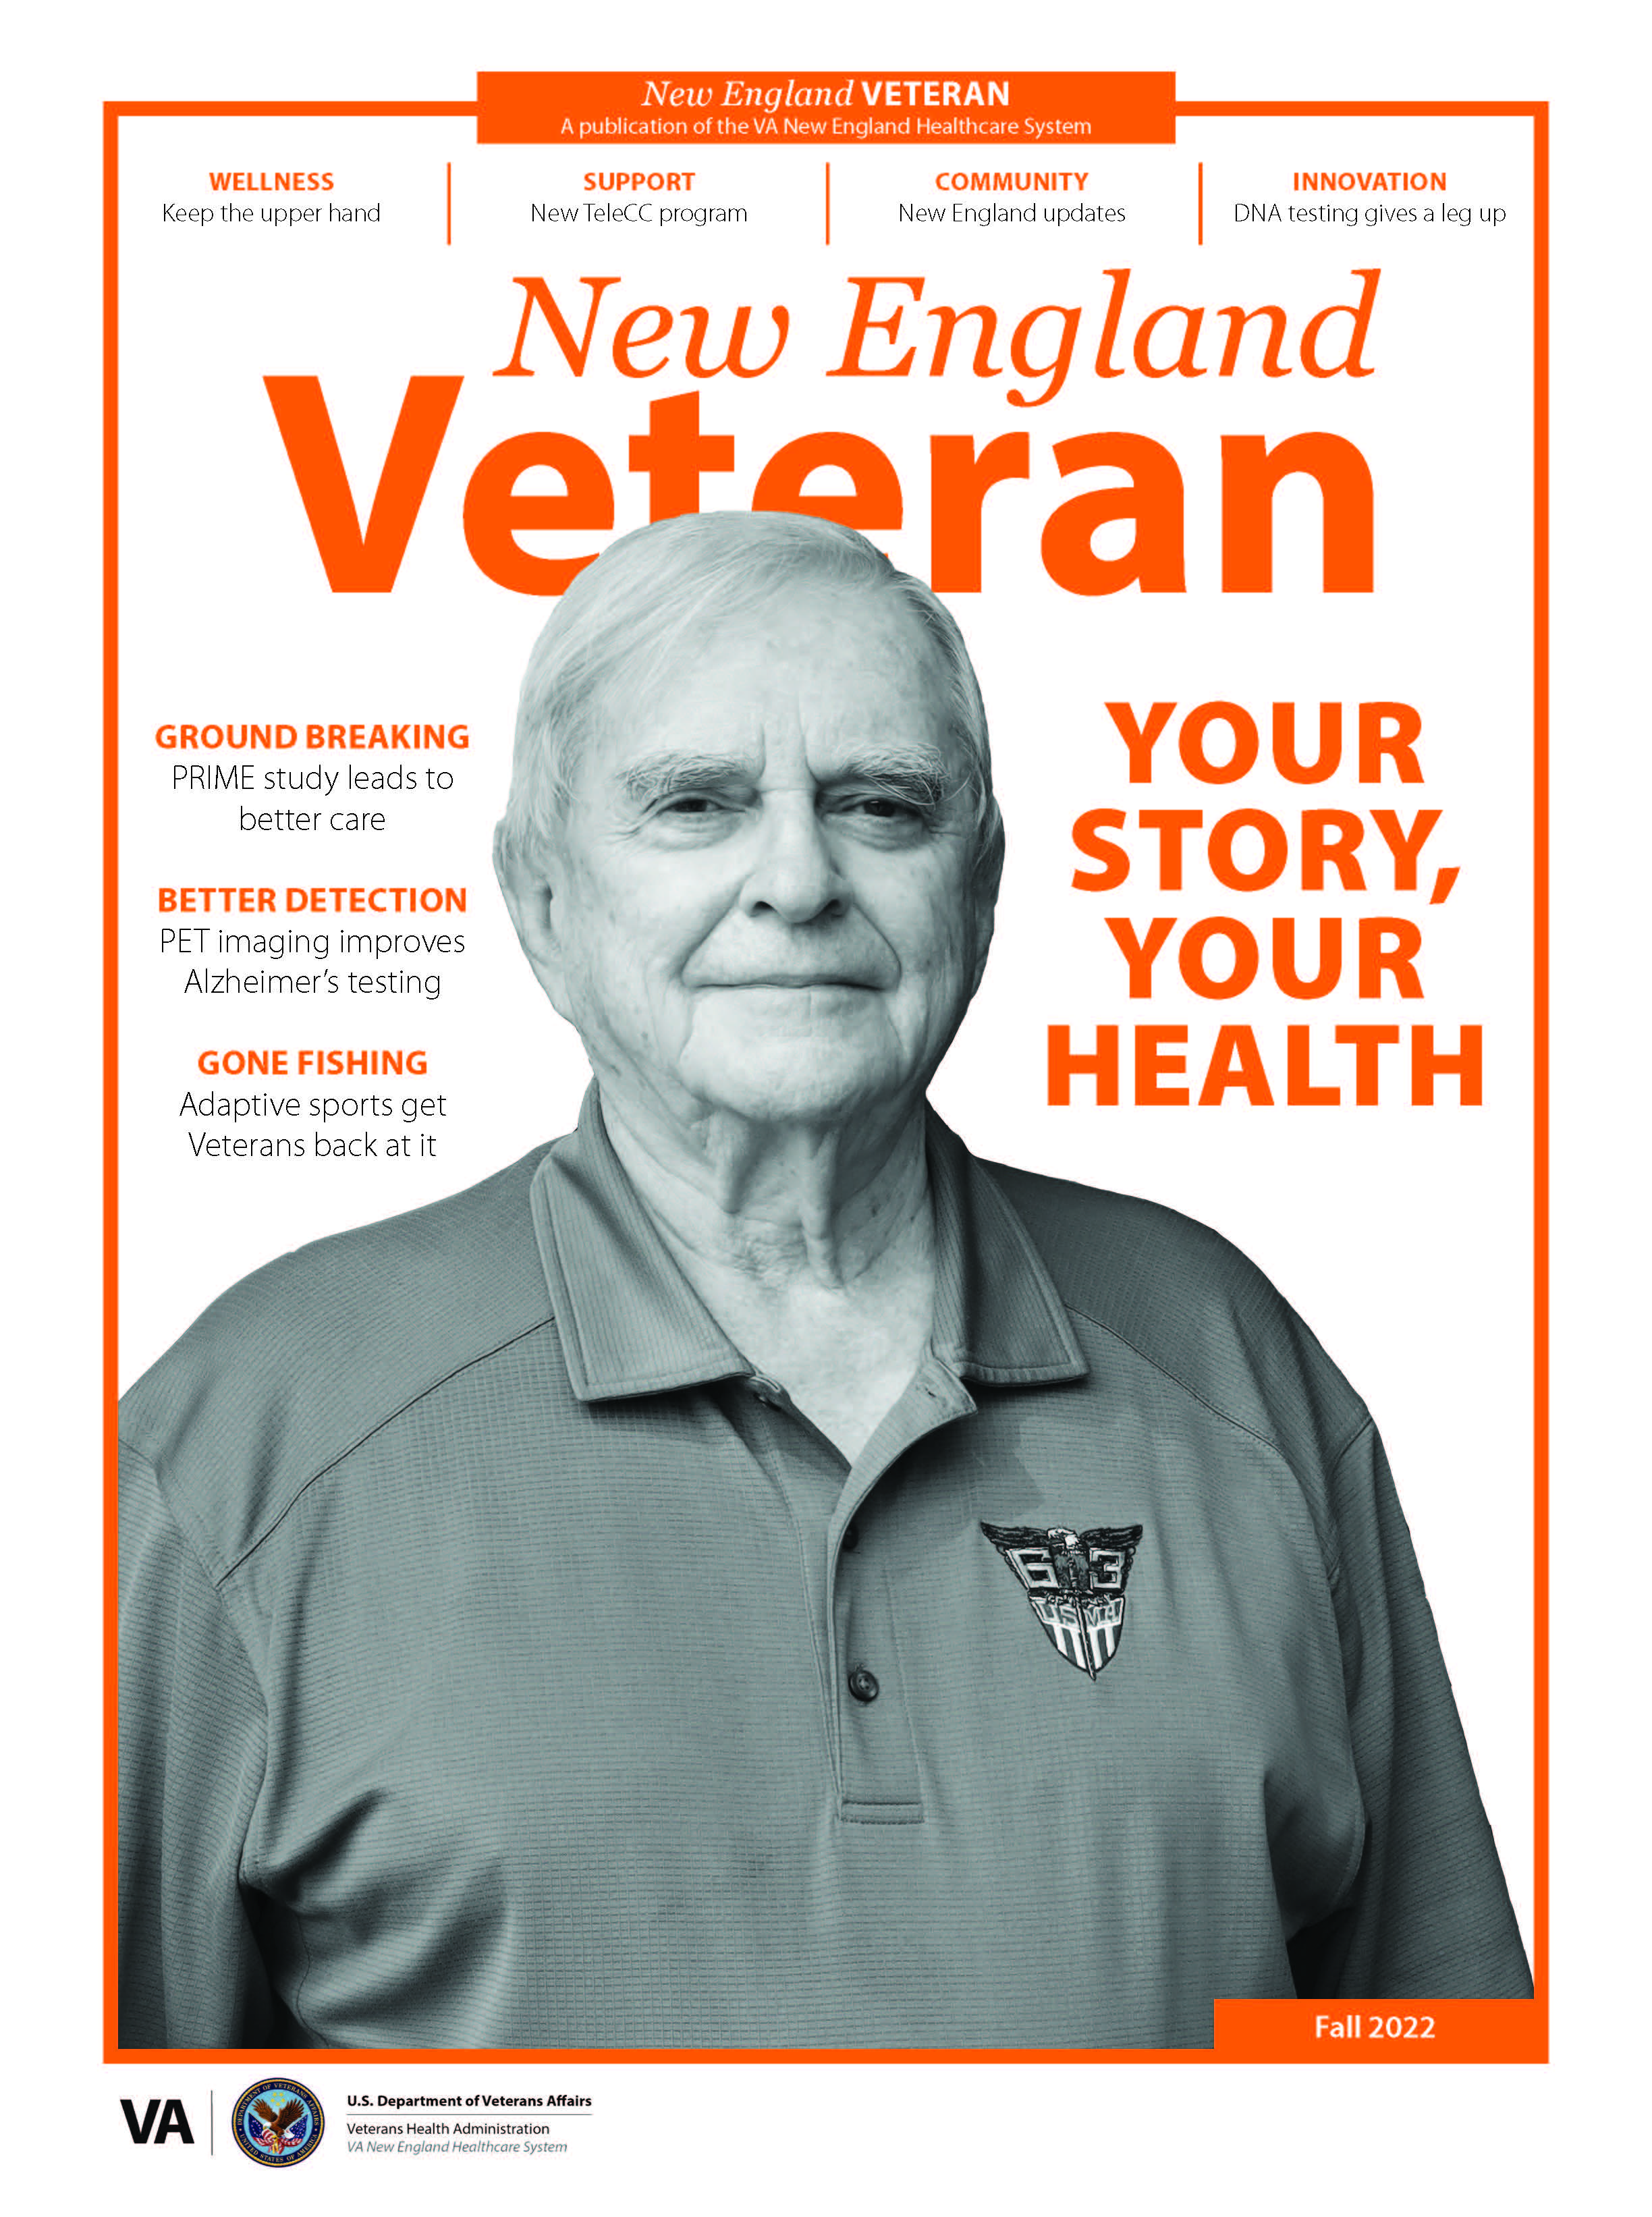 Cover photo of the Fall issue of the New England Veteran